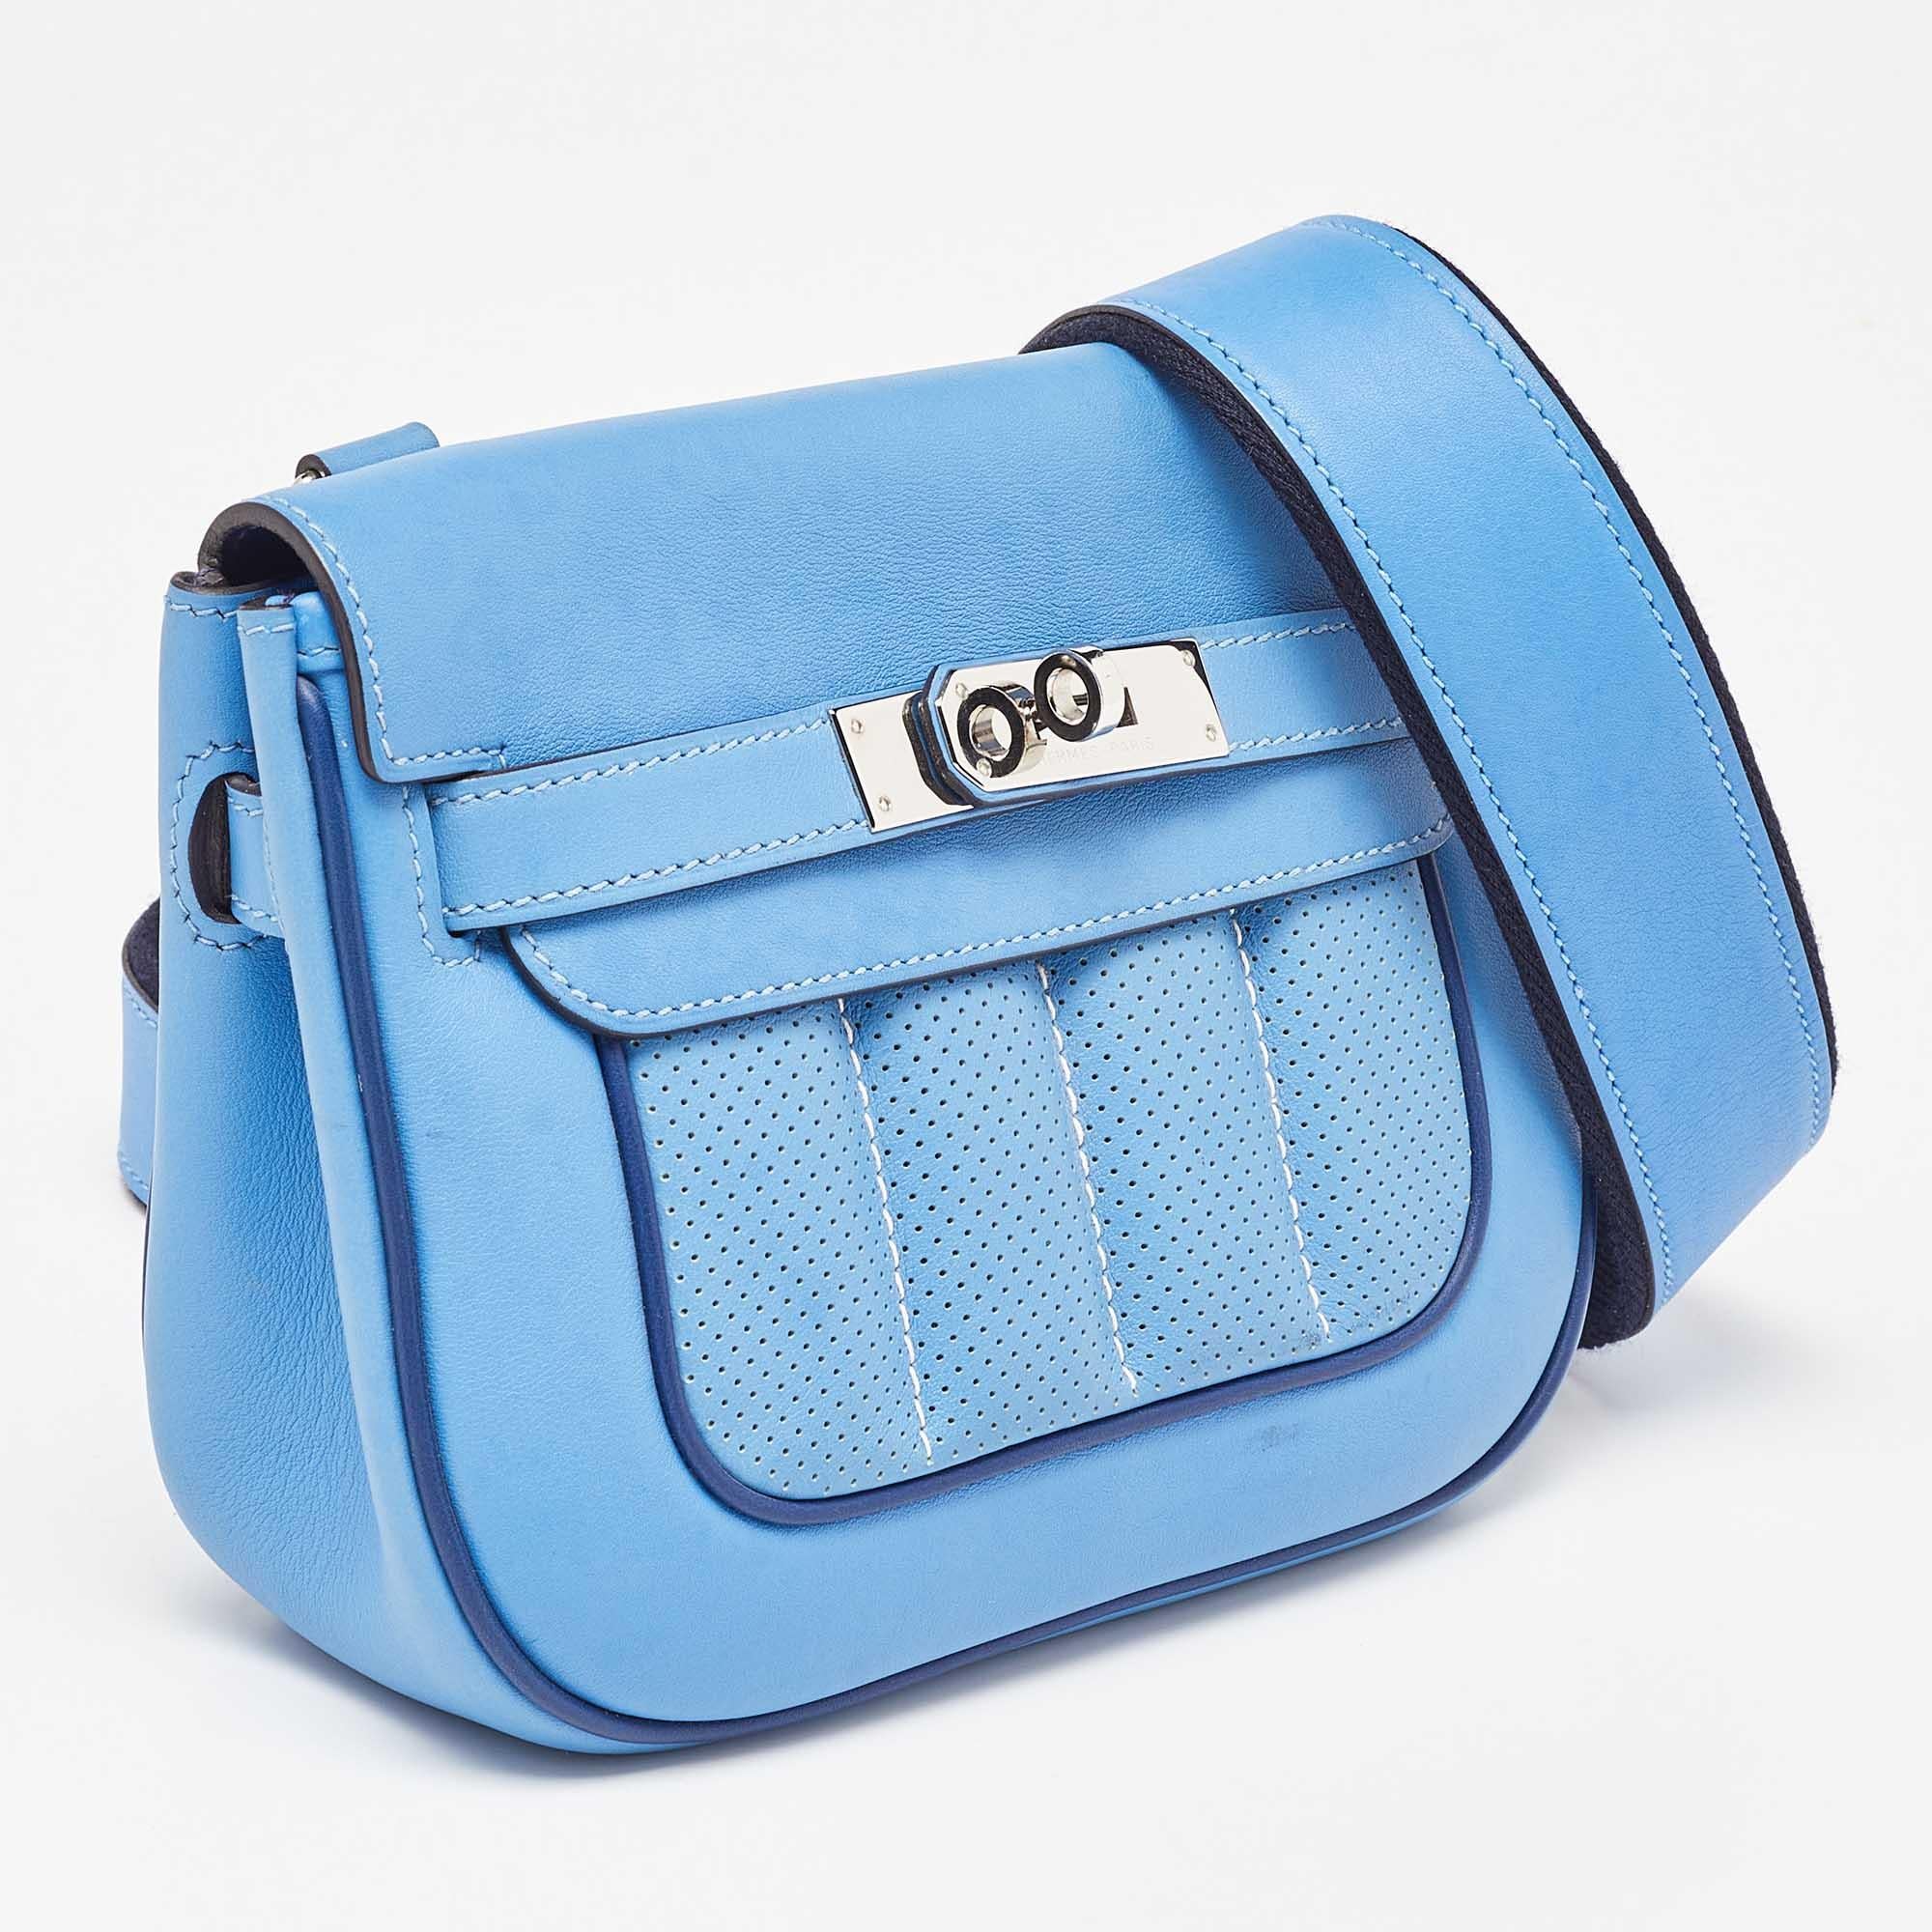 Crafted with excellence from blue Brighton Swift leather, this Hermes Berline bag will make a dream buy if you're looking for luxury that is handy and durable. The bag is blessed with the iconic Kelly lock on the flap, rounded corners and a leather